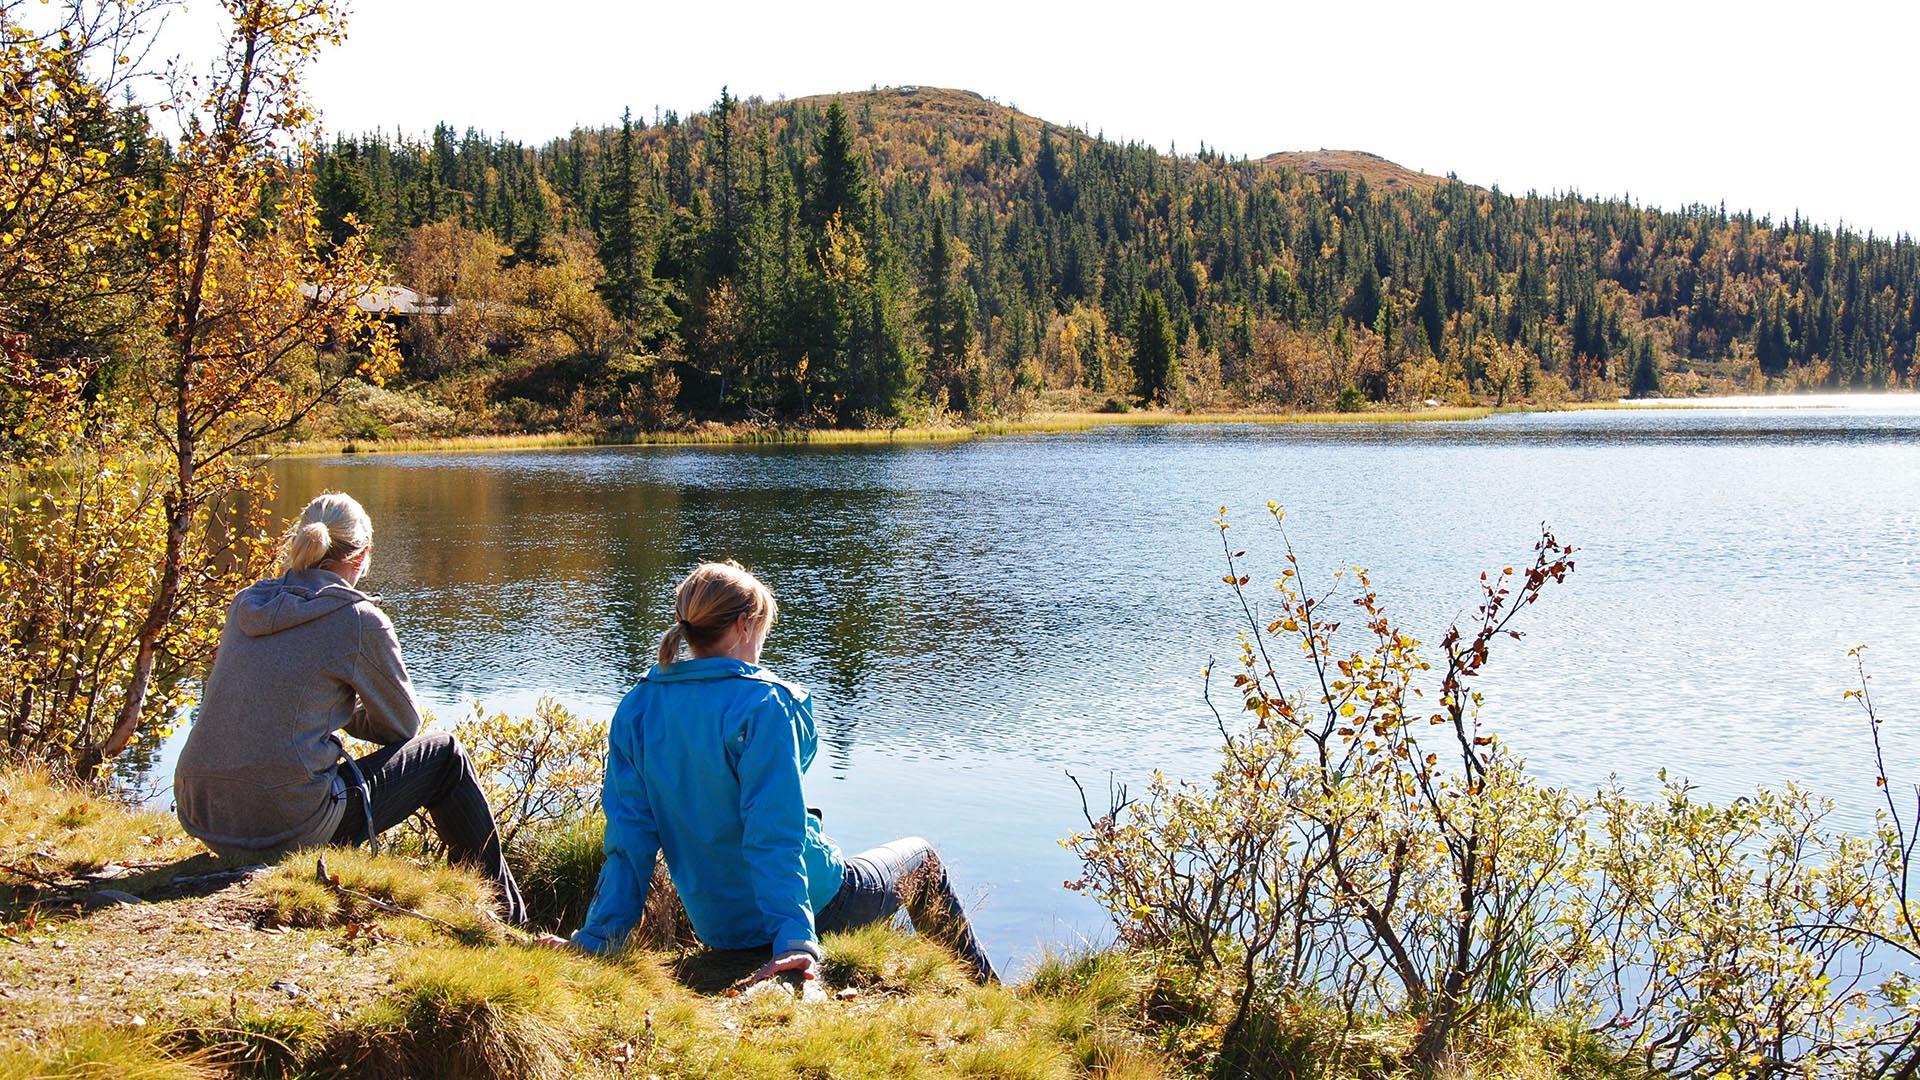 To women sit on a lakeshore in an autumn-coloured mountain forest just below the tree line.